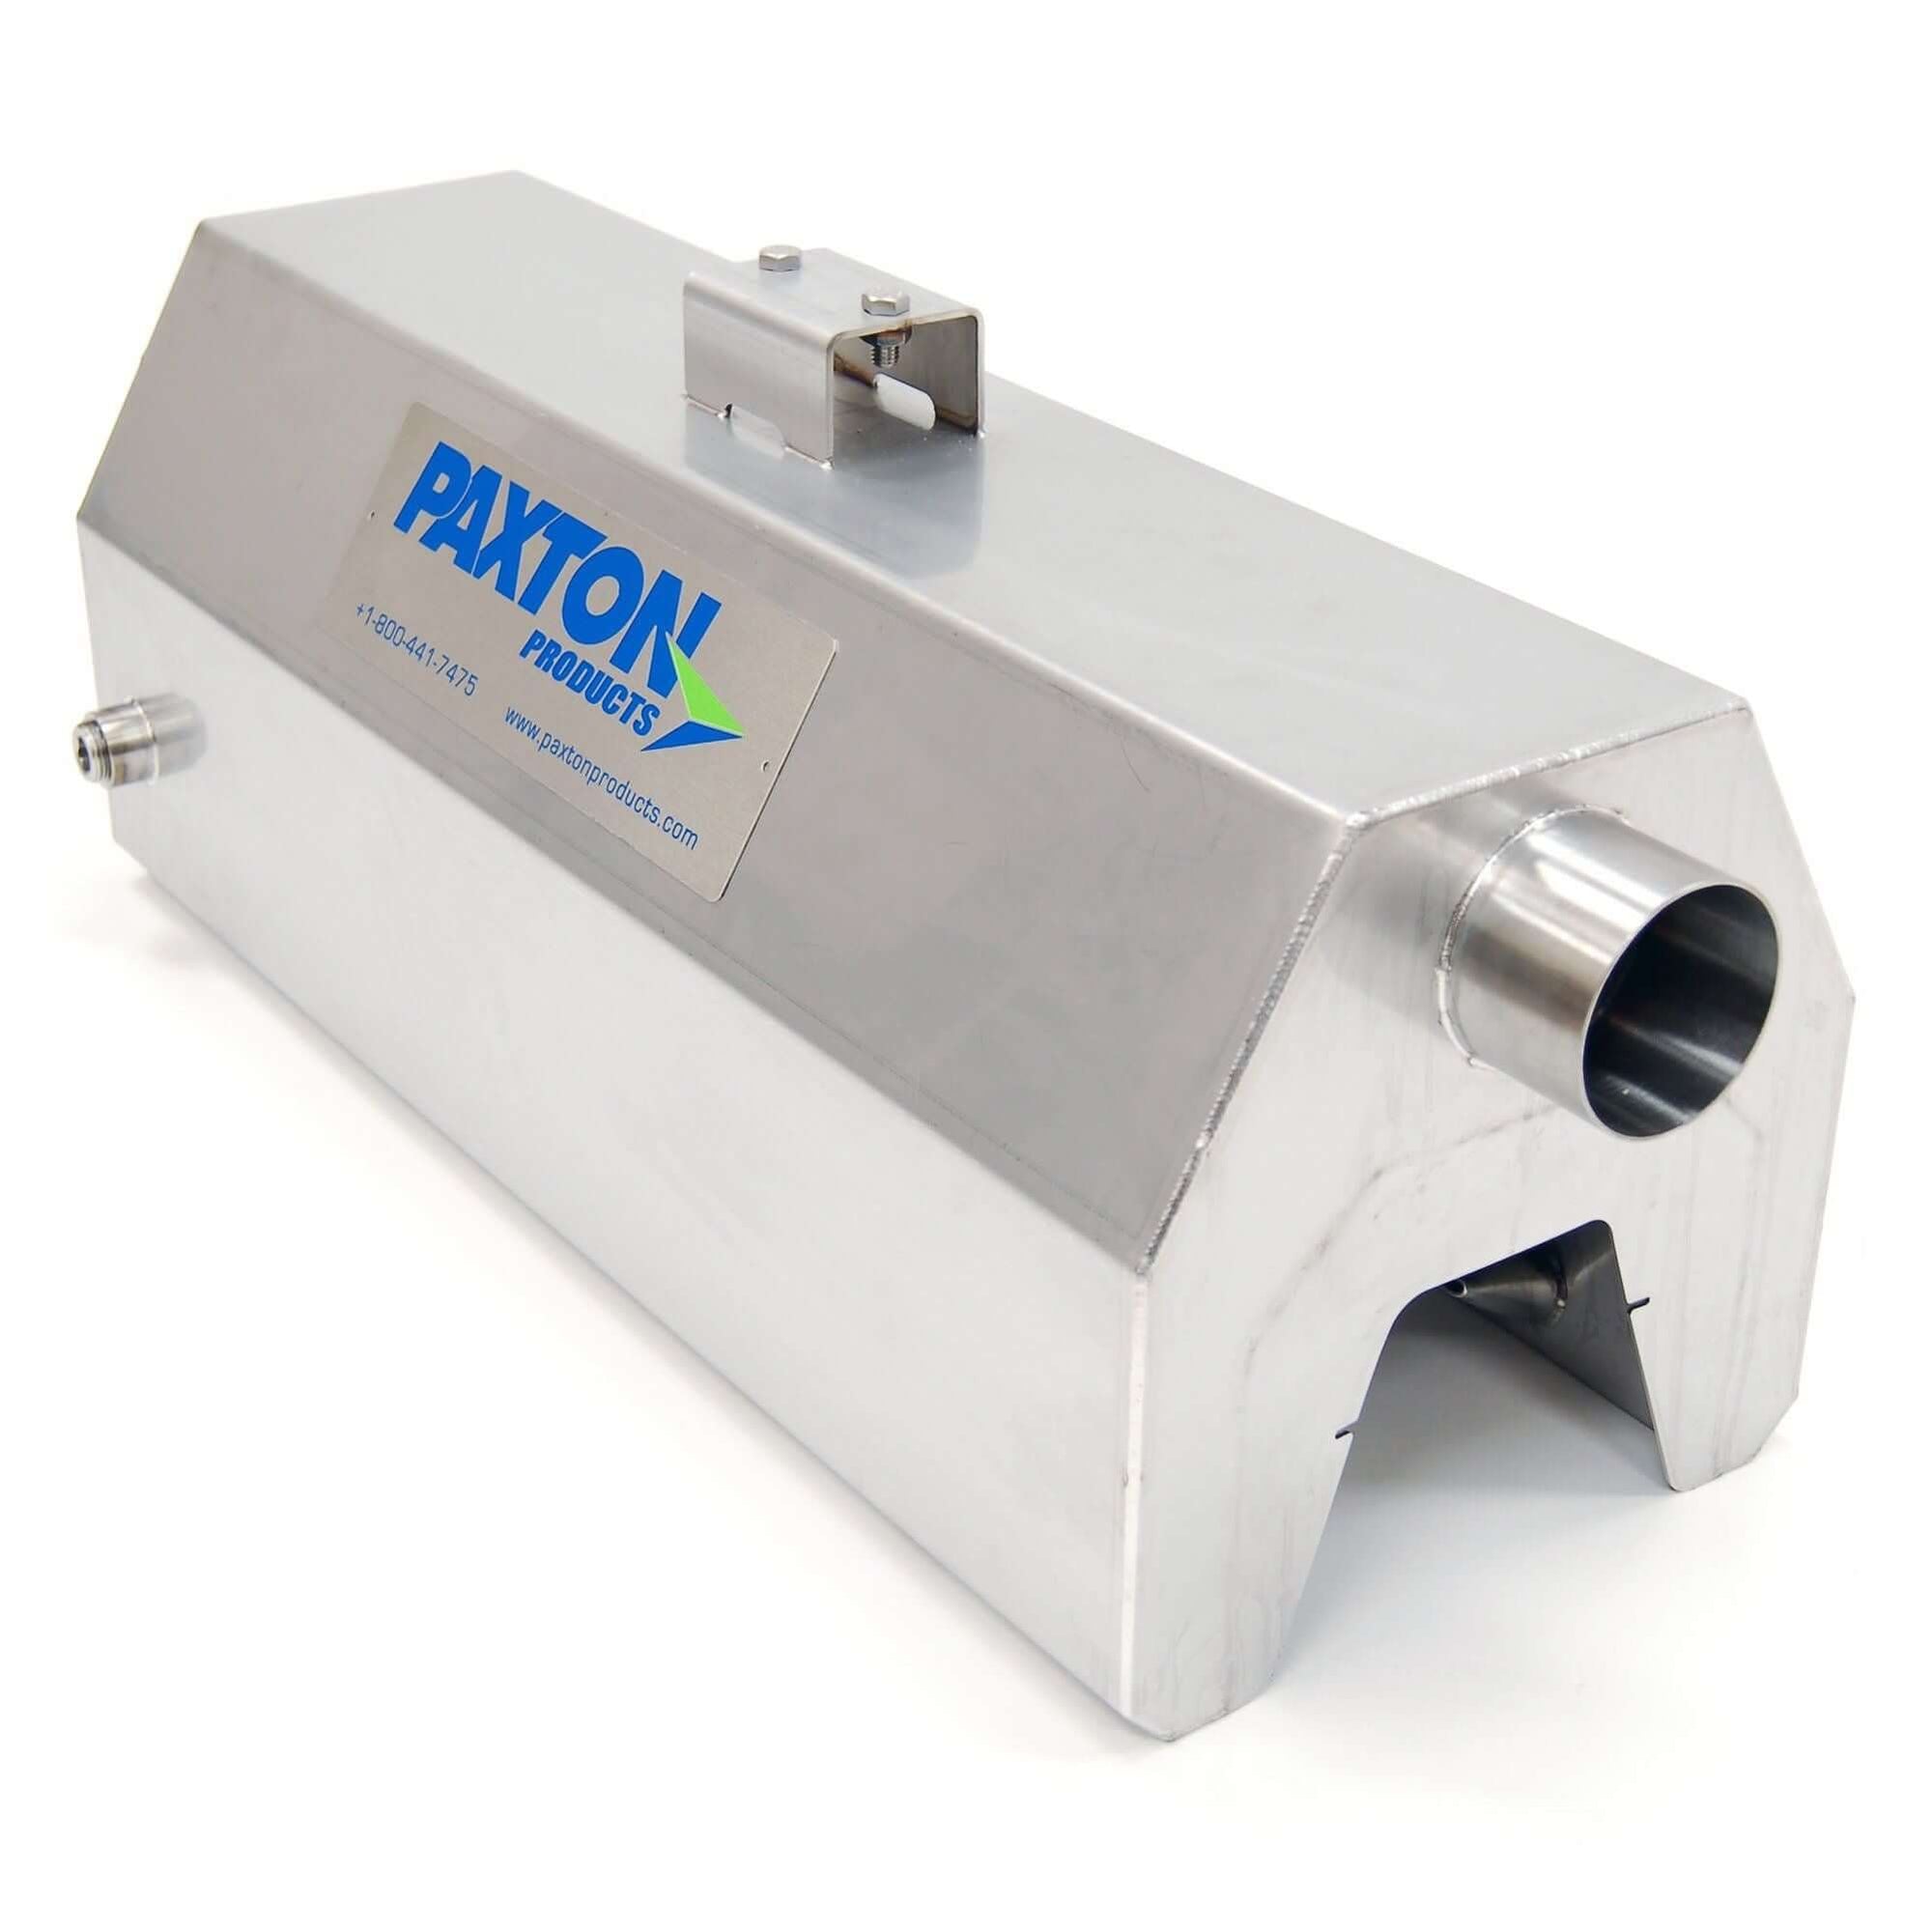 Paxton Products Compressed Air Cap Dryer System CapDryer-System accessories, paxton